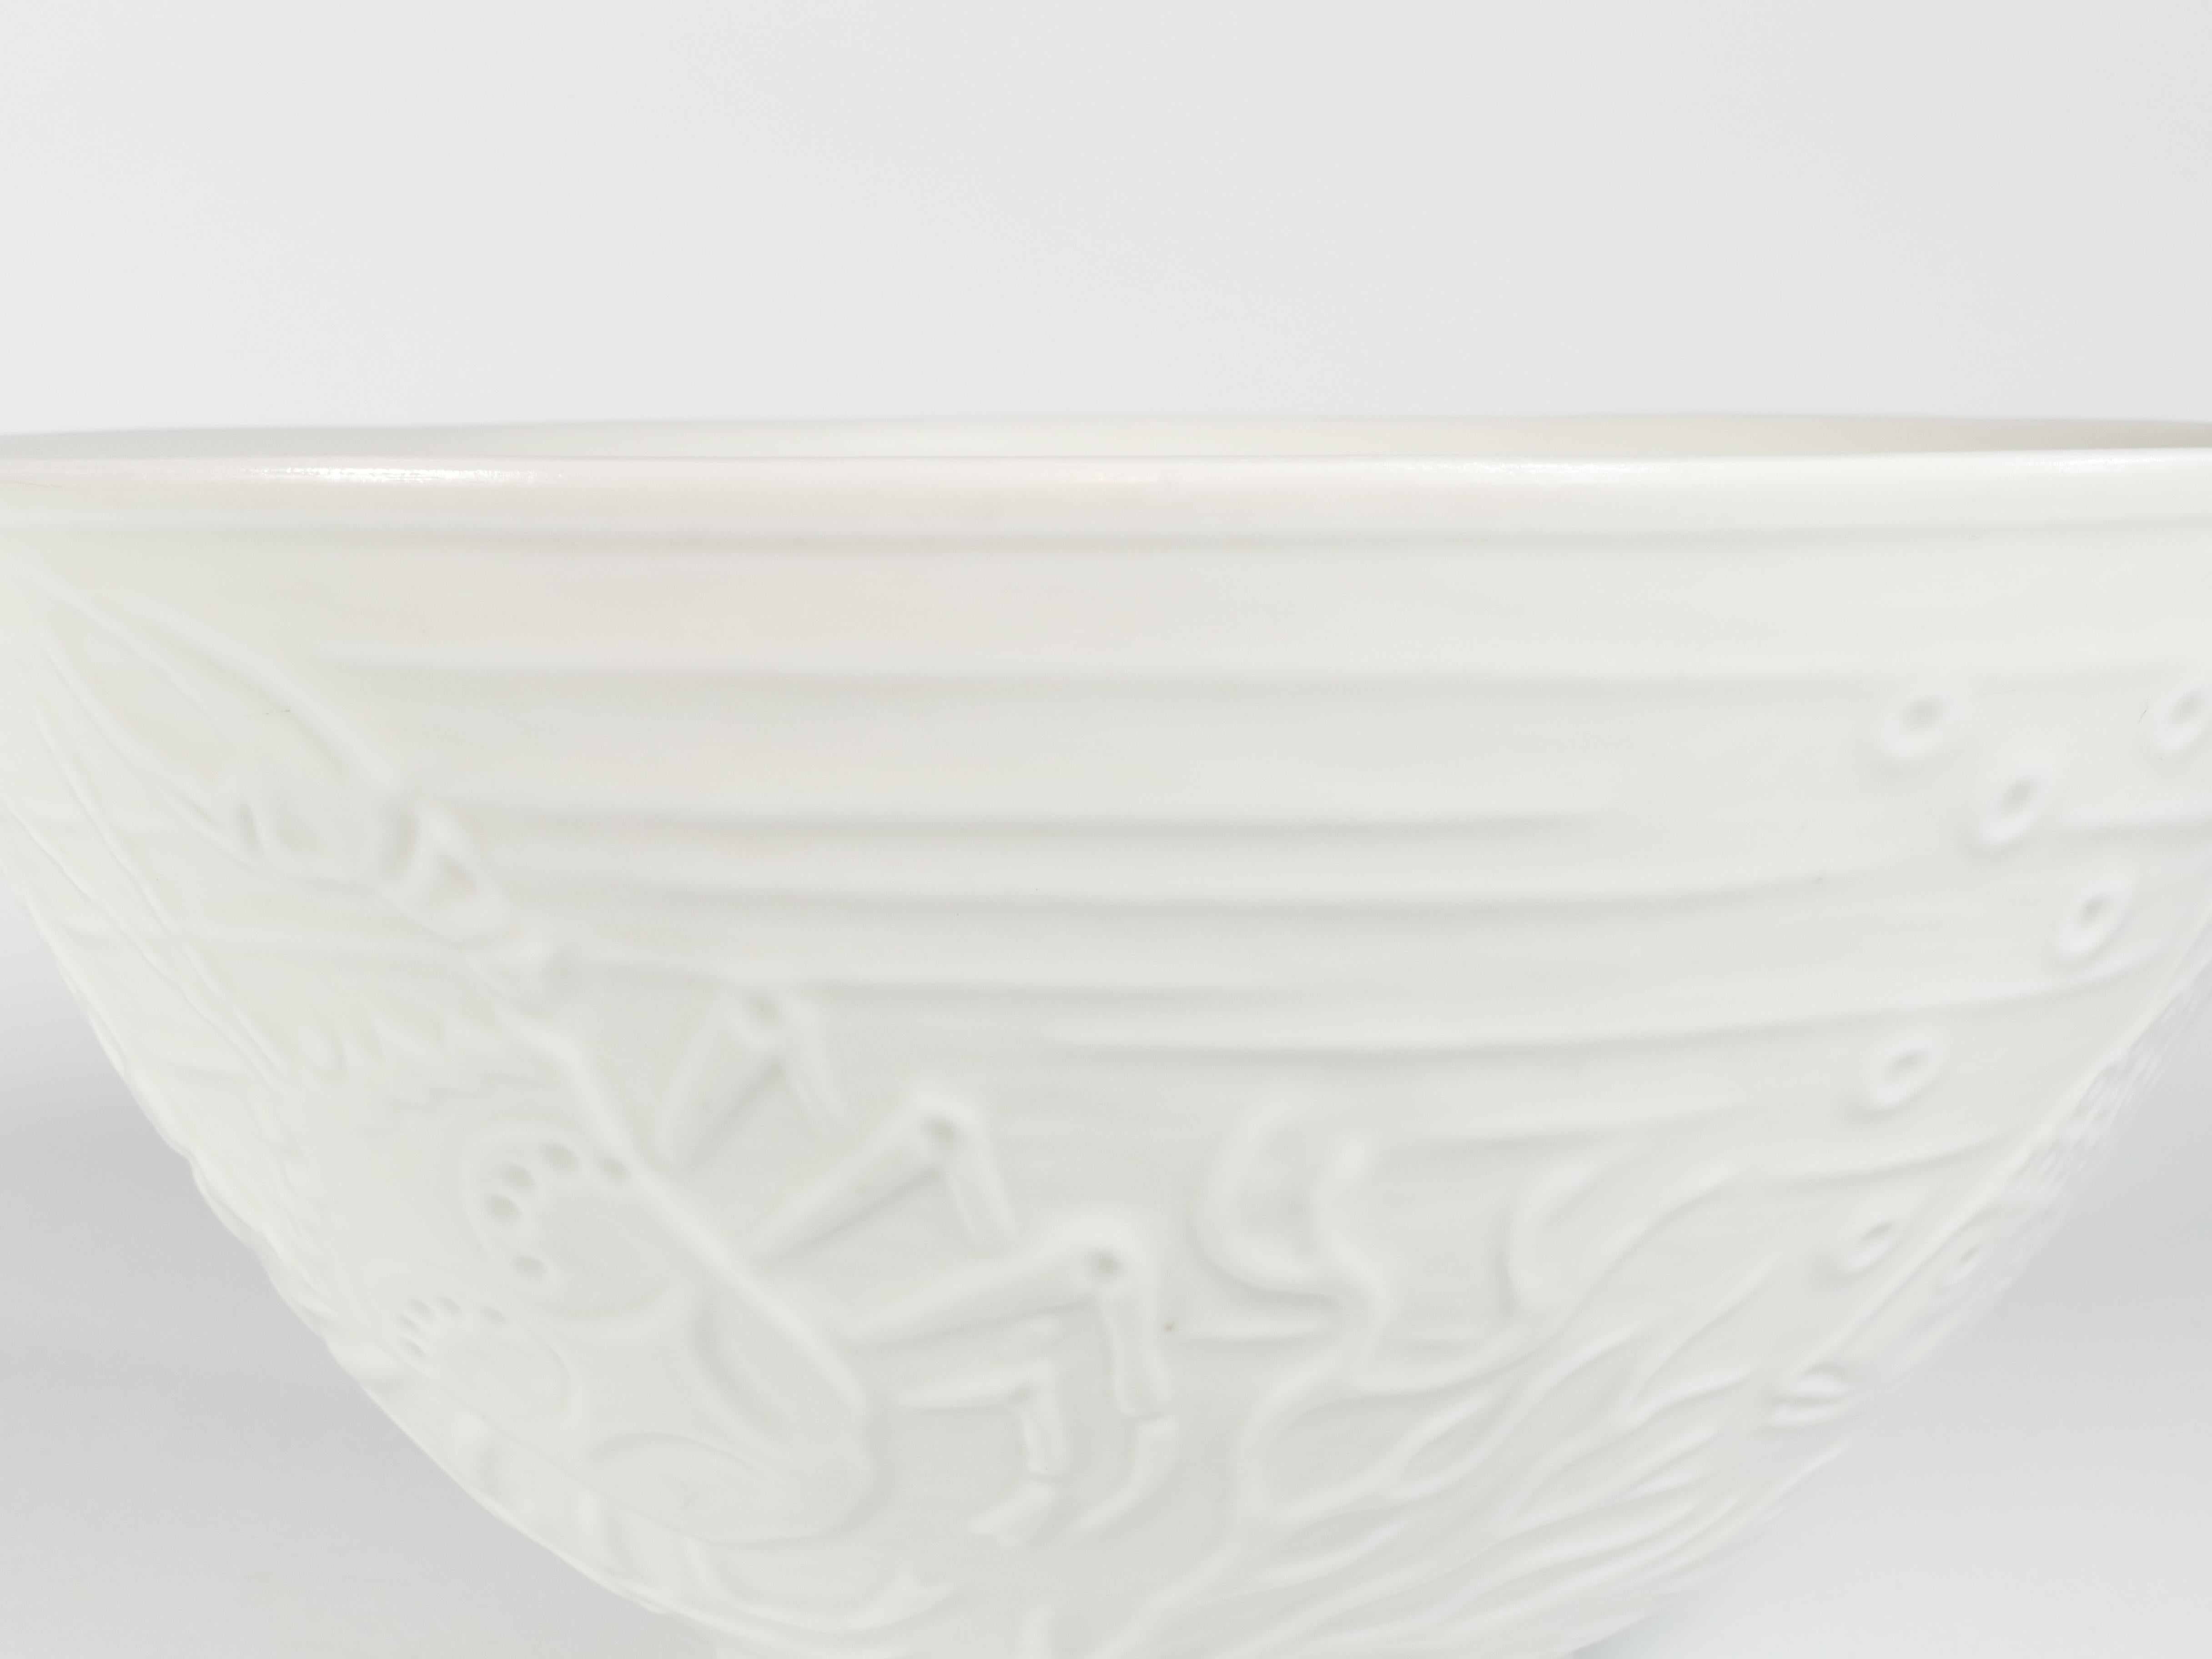  This is a large and thin, translucent white porcelain bowl designed by Gunnar Nylund for ALP Lidköping/Rörstrand. The bowl features a very handsome relief decoration depicting two fish, a crab, and an eel. The presence of the 